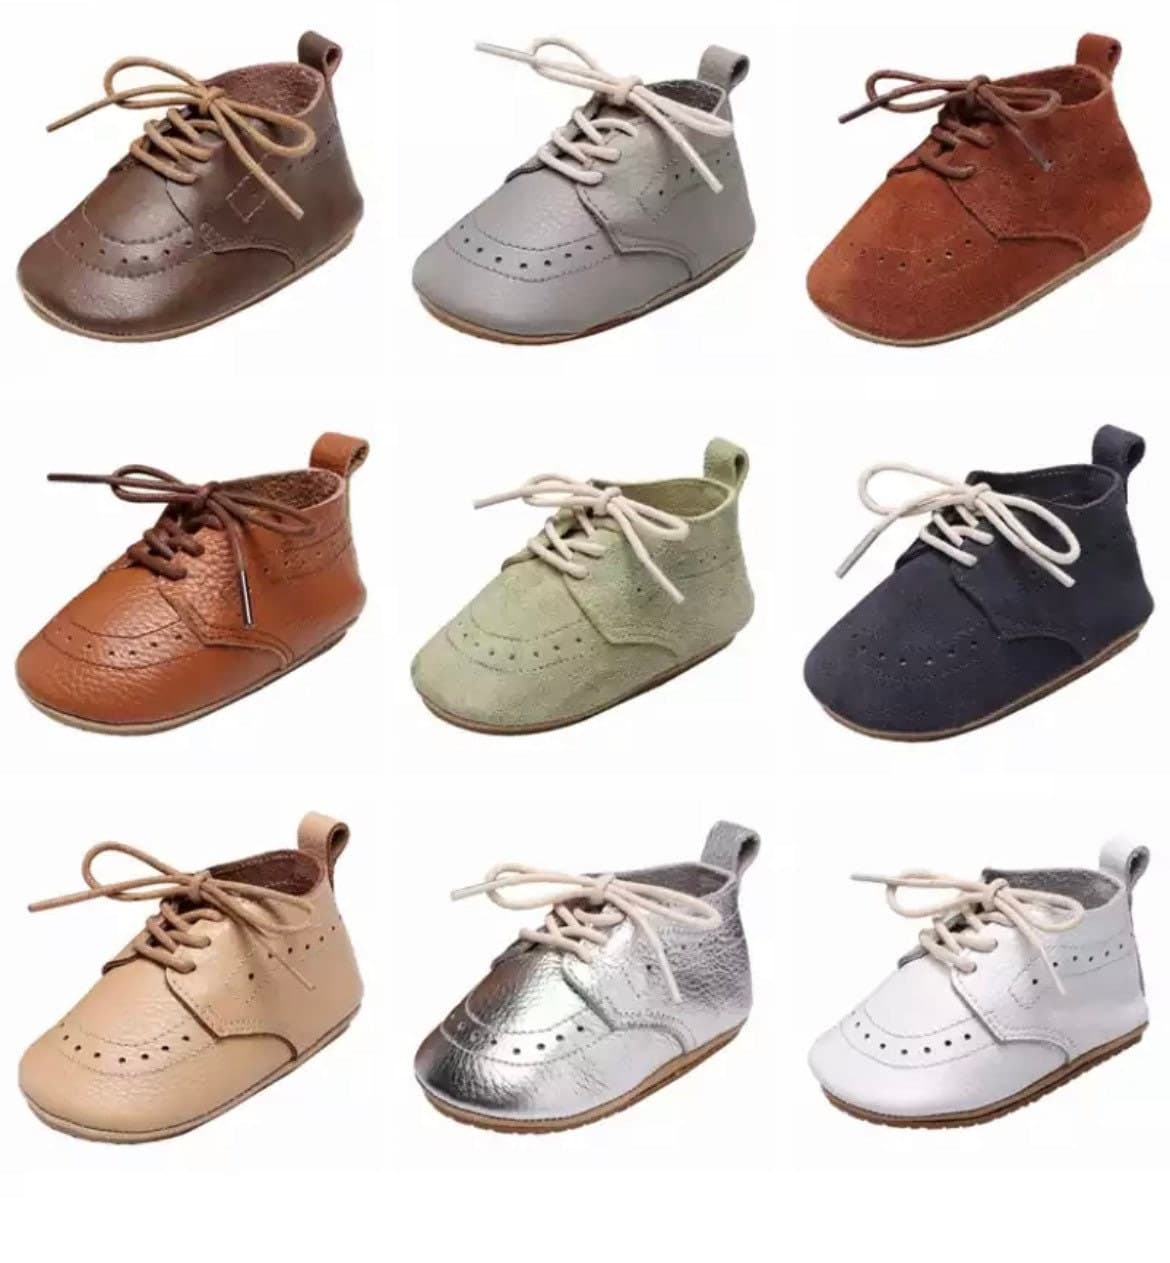 Baby Oxford Brogues - Handmade Genuine Leather Baby Shoes, Tan Leather-These are gorgeous leather baby shoes, baby oxford shoes or baby brogues as known by many.
Baby Brogues - Handmade Genuine Leather Baby Shoes, in Tan Leather.Differe-Bijou Bubs